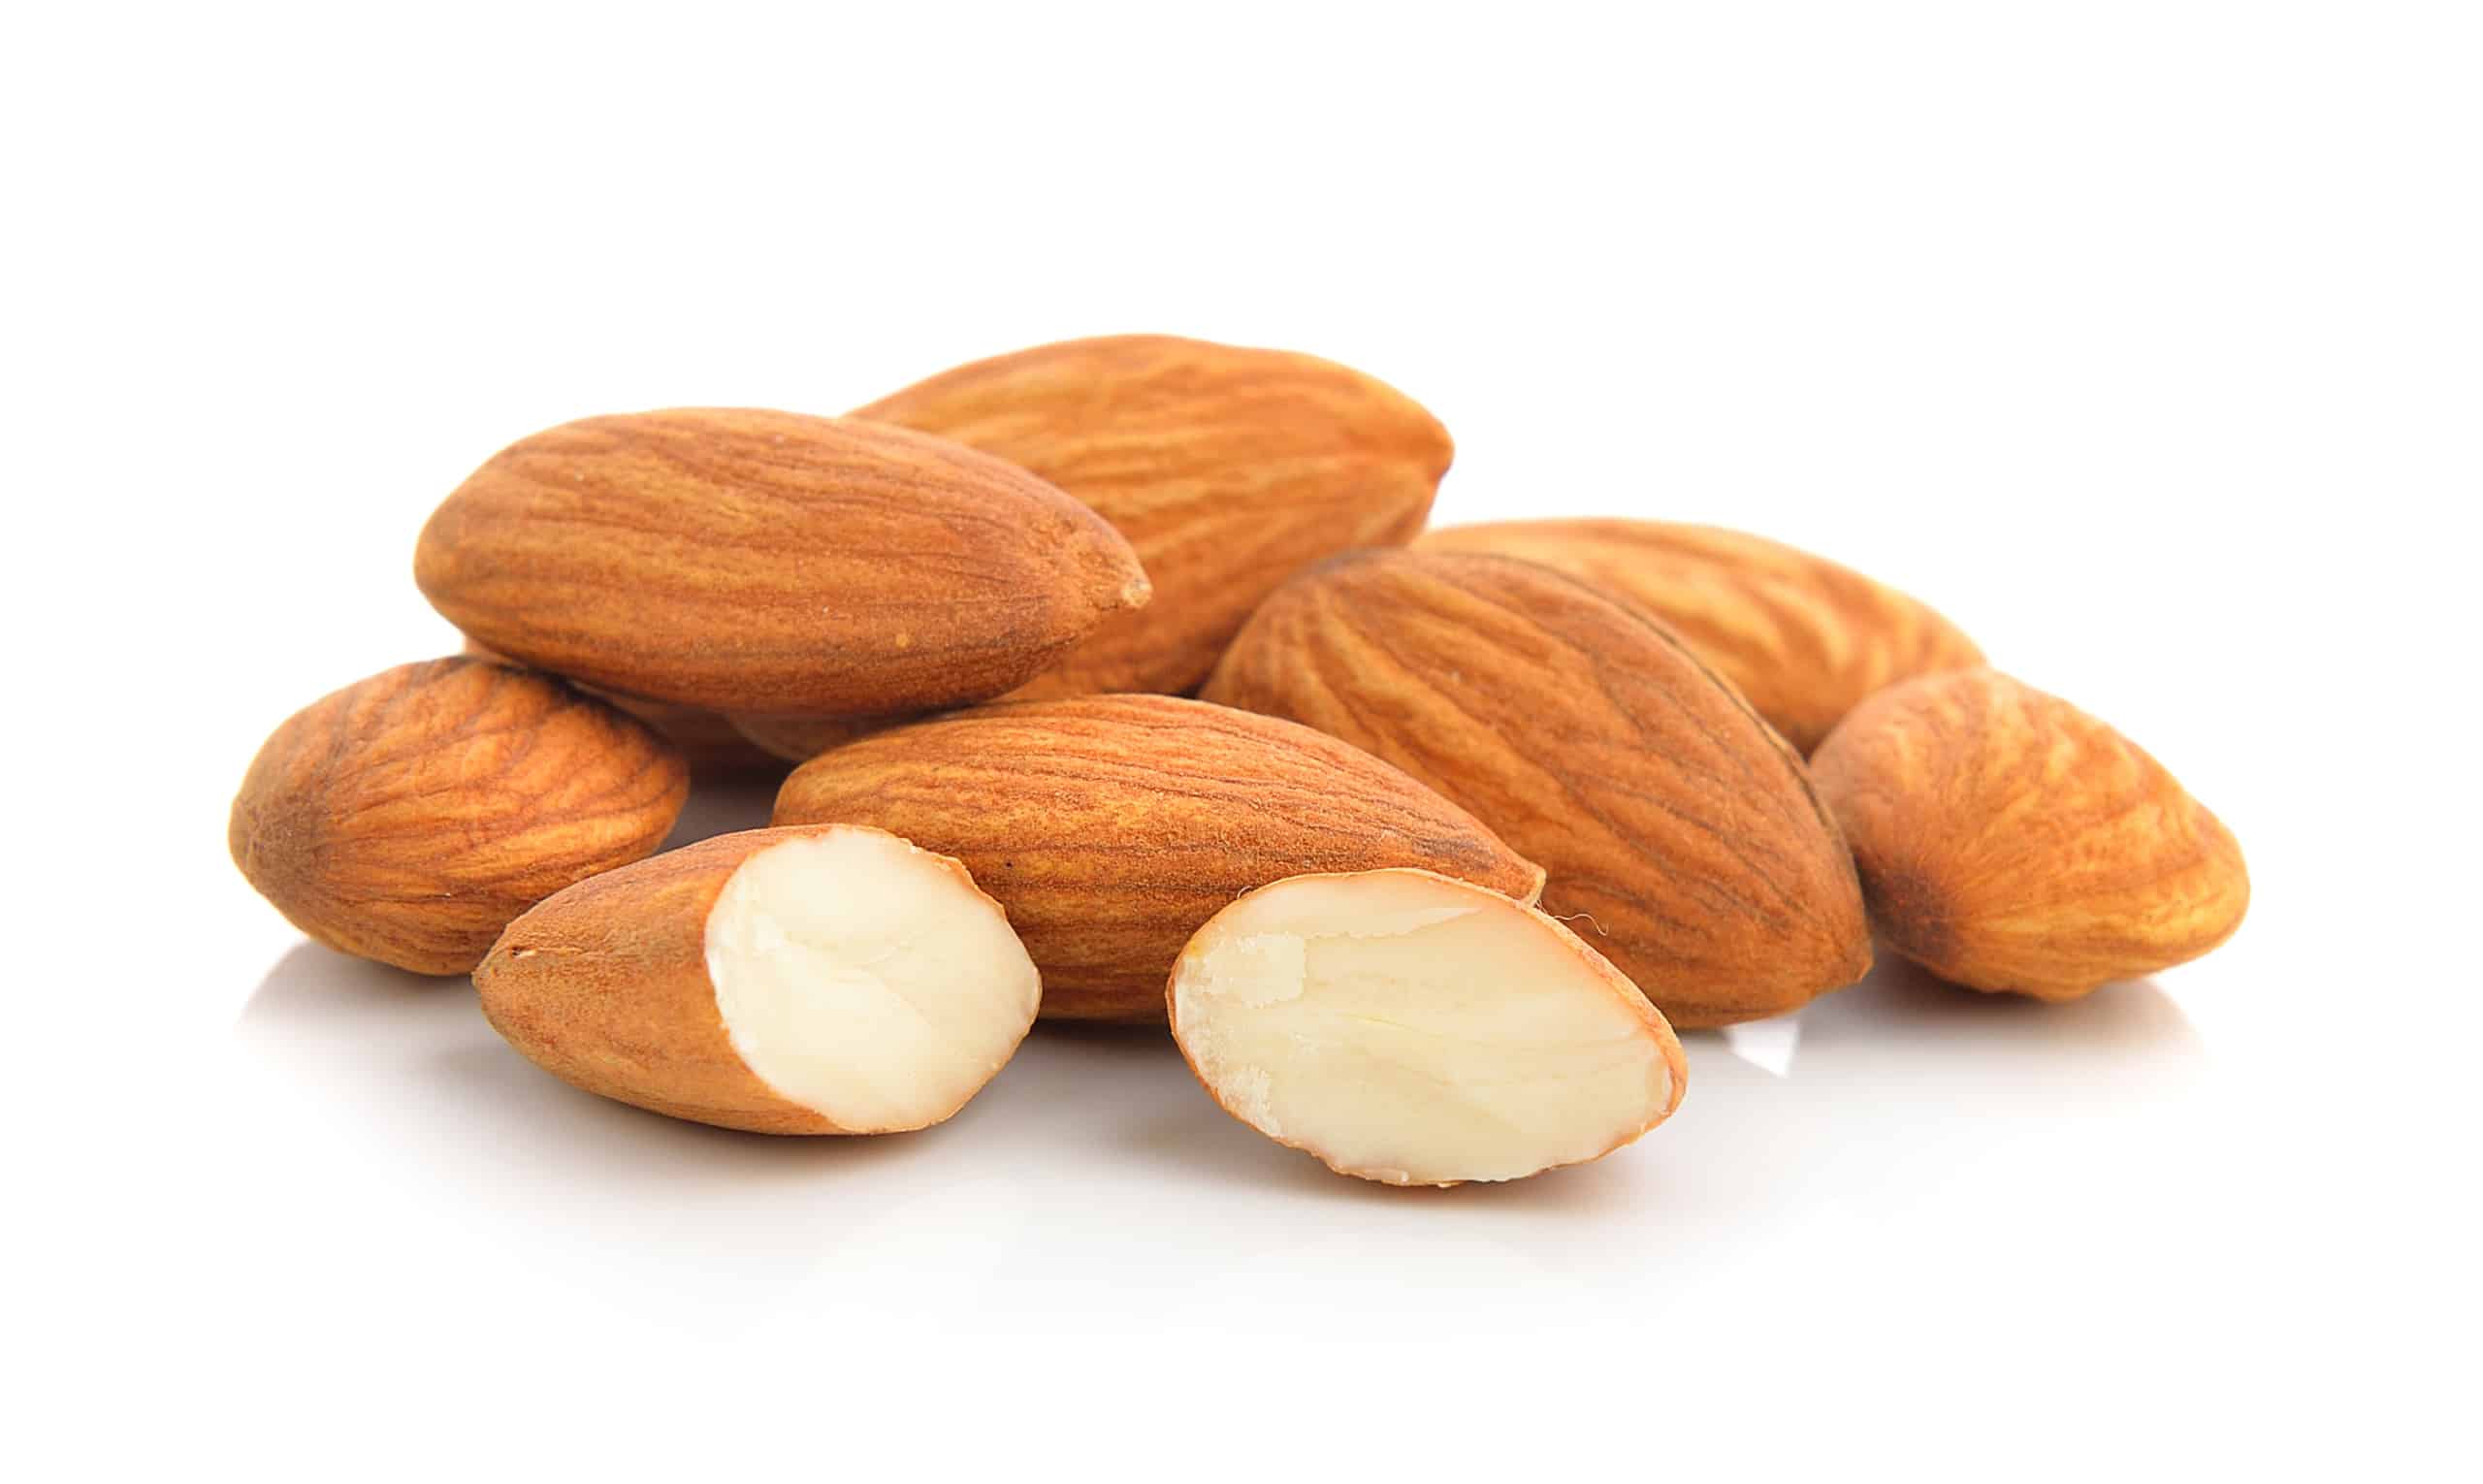 How Many Calories in Almonds